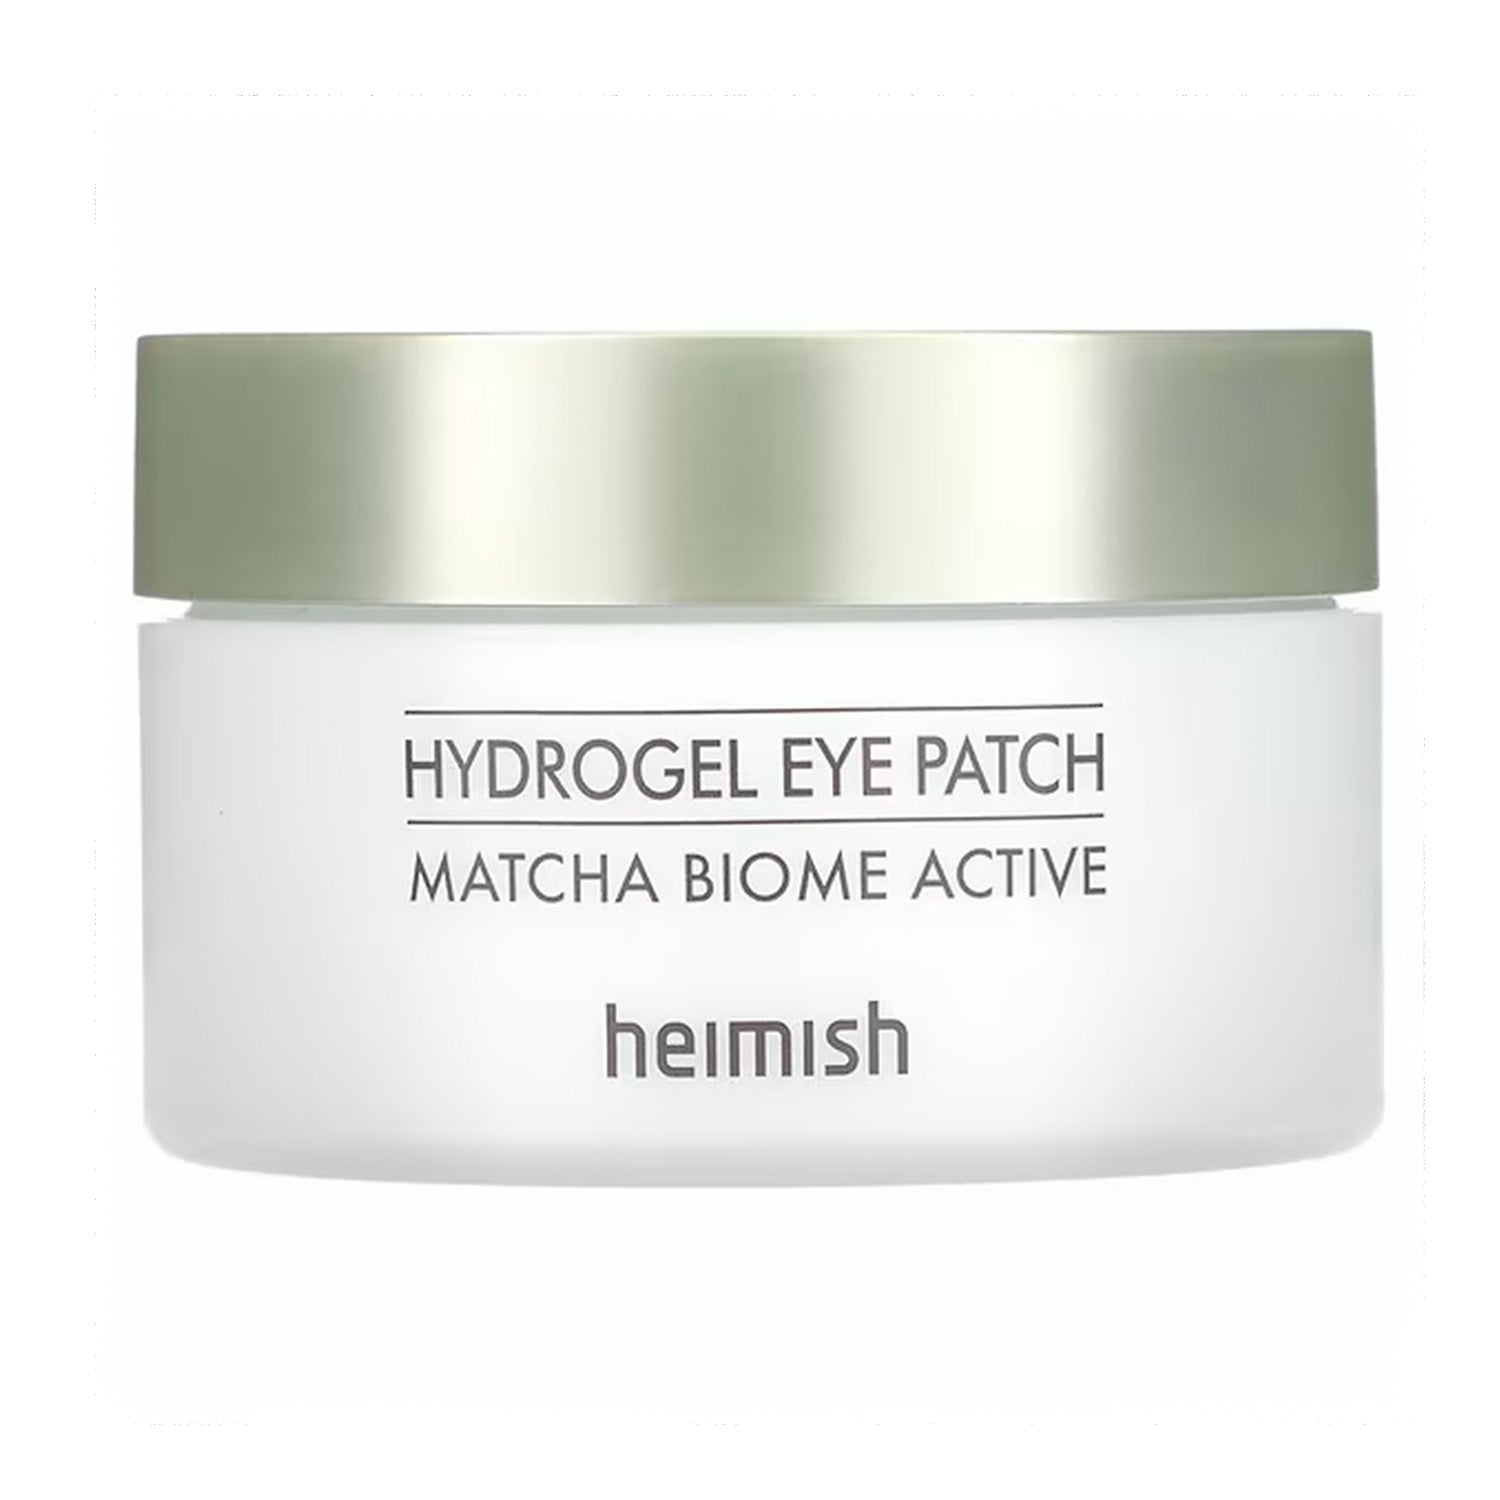 Heimish Matcha Biome Hydrogel Eye Patch are a 3-in-1 multifunctional eye patch soothes, brightens, and helps reduce the signs of aging around the eye area. 